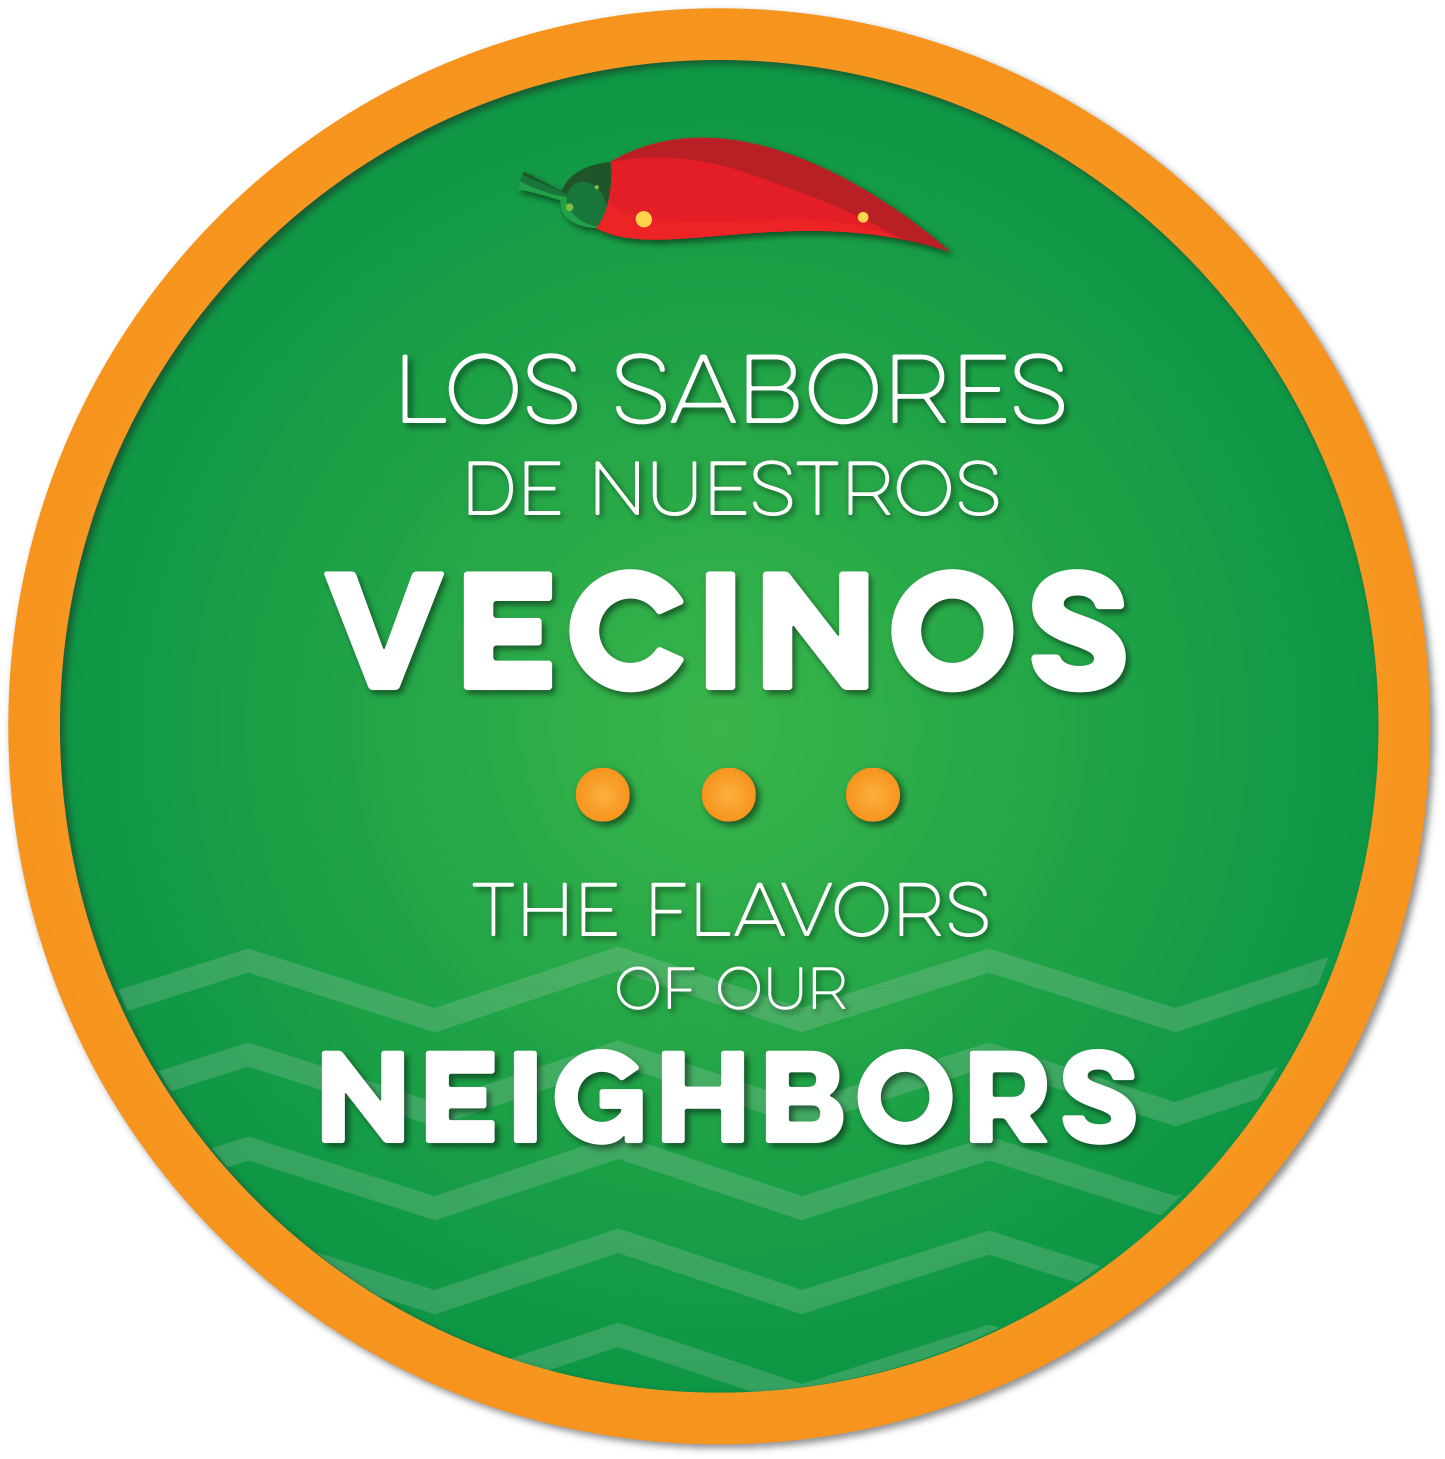 The Flavors of Our Neighbors